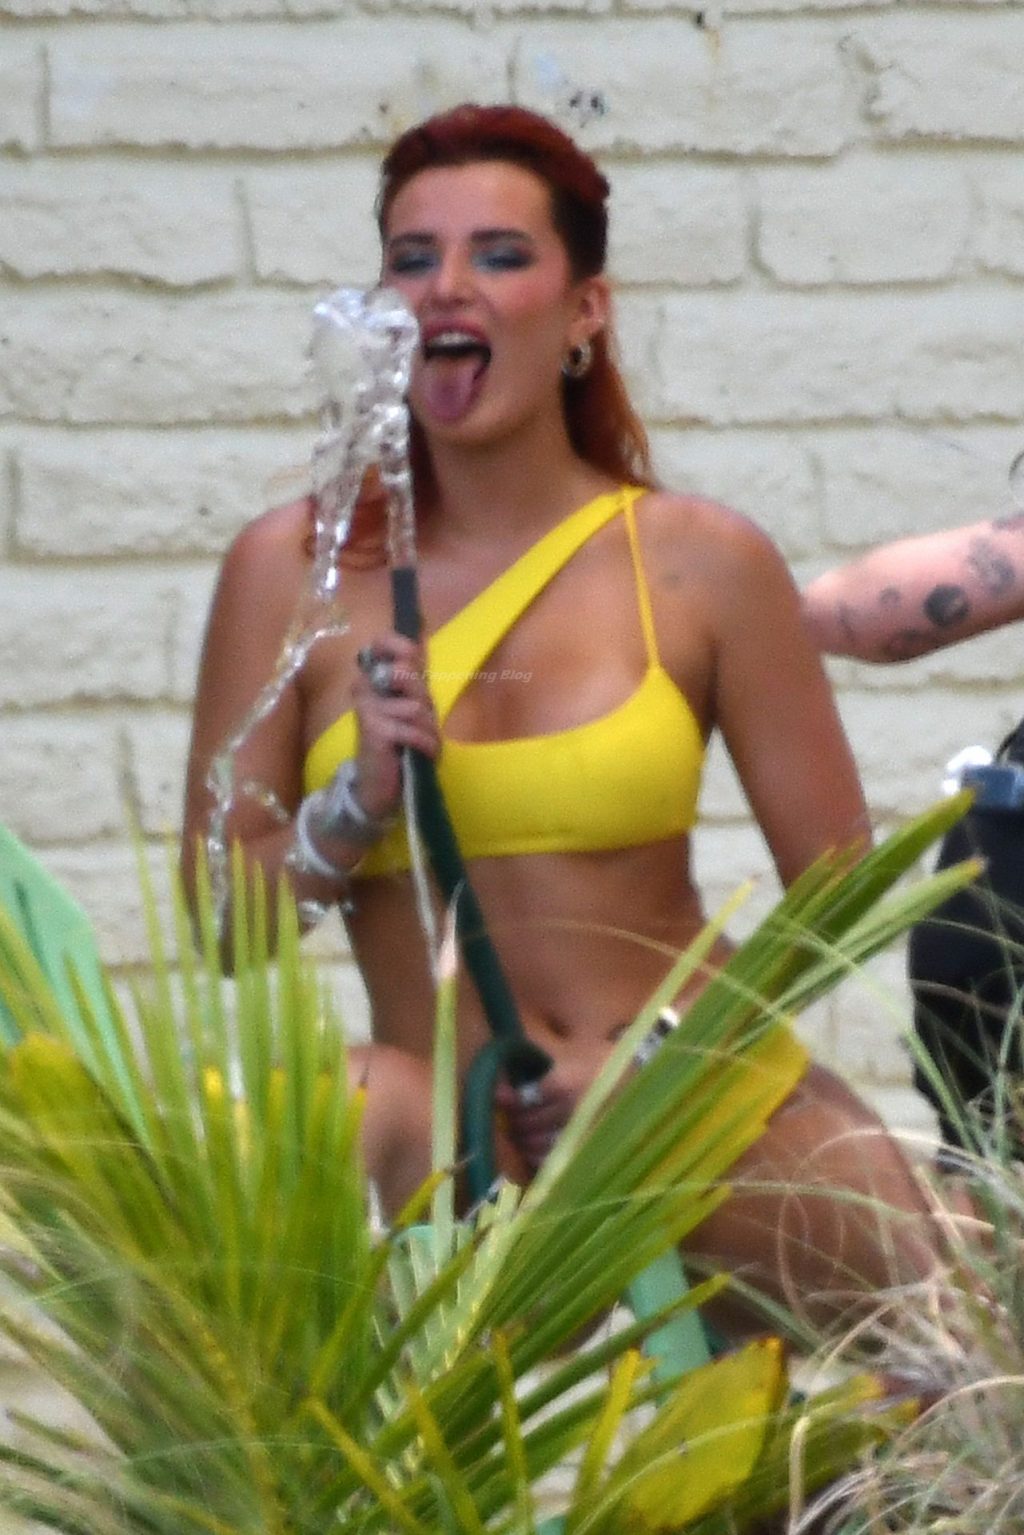 Bella Thorne Poses Seductively with a Water Hose During a Shoot in Miami (79 Photos)